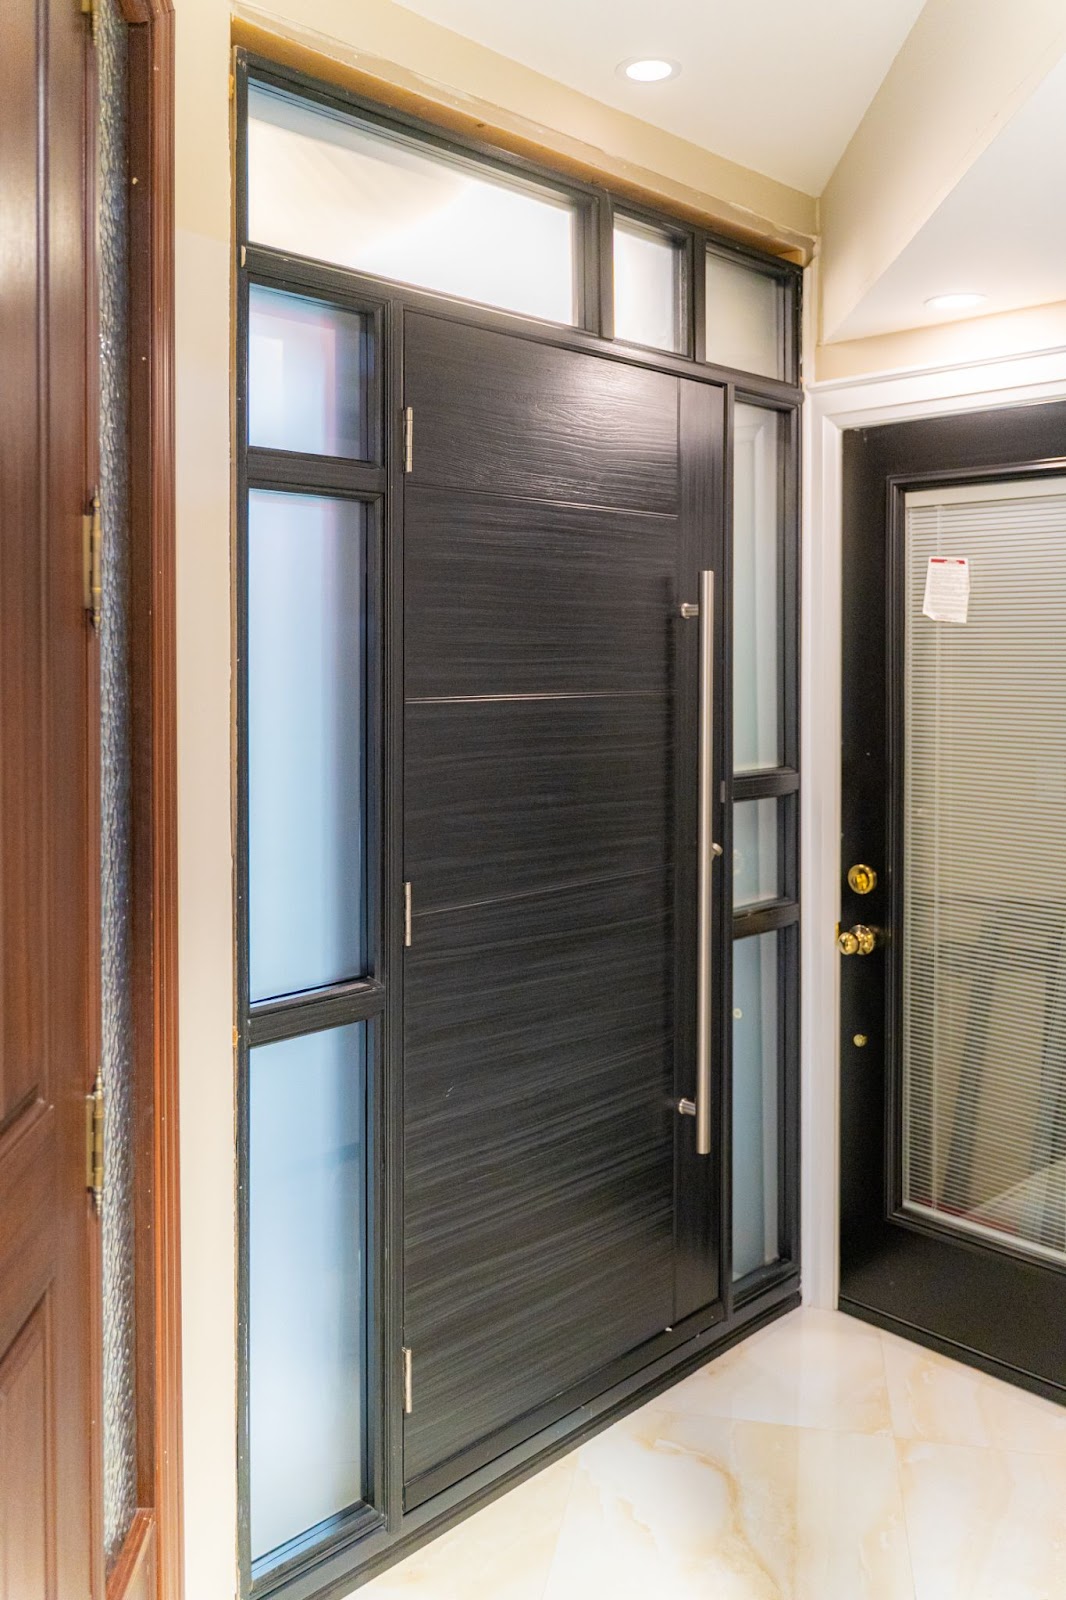 Find high-quality front doors in various styles at Total Home Windows & Doors, Unit 33, 167, 76